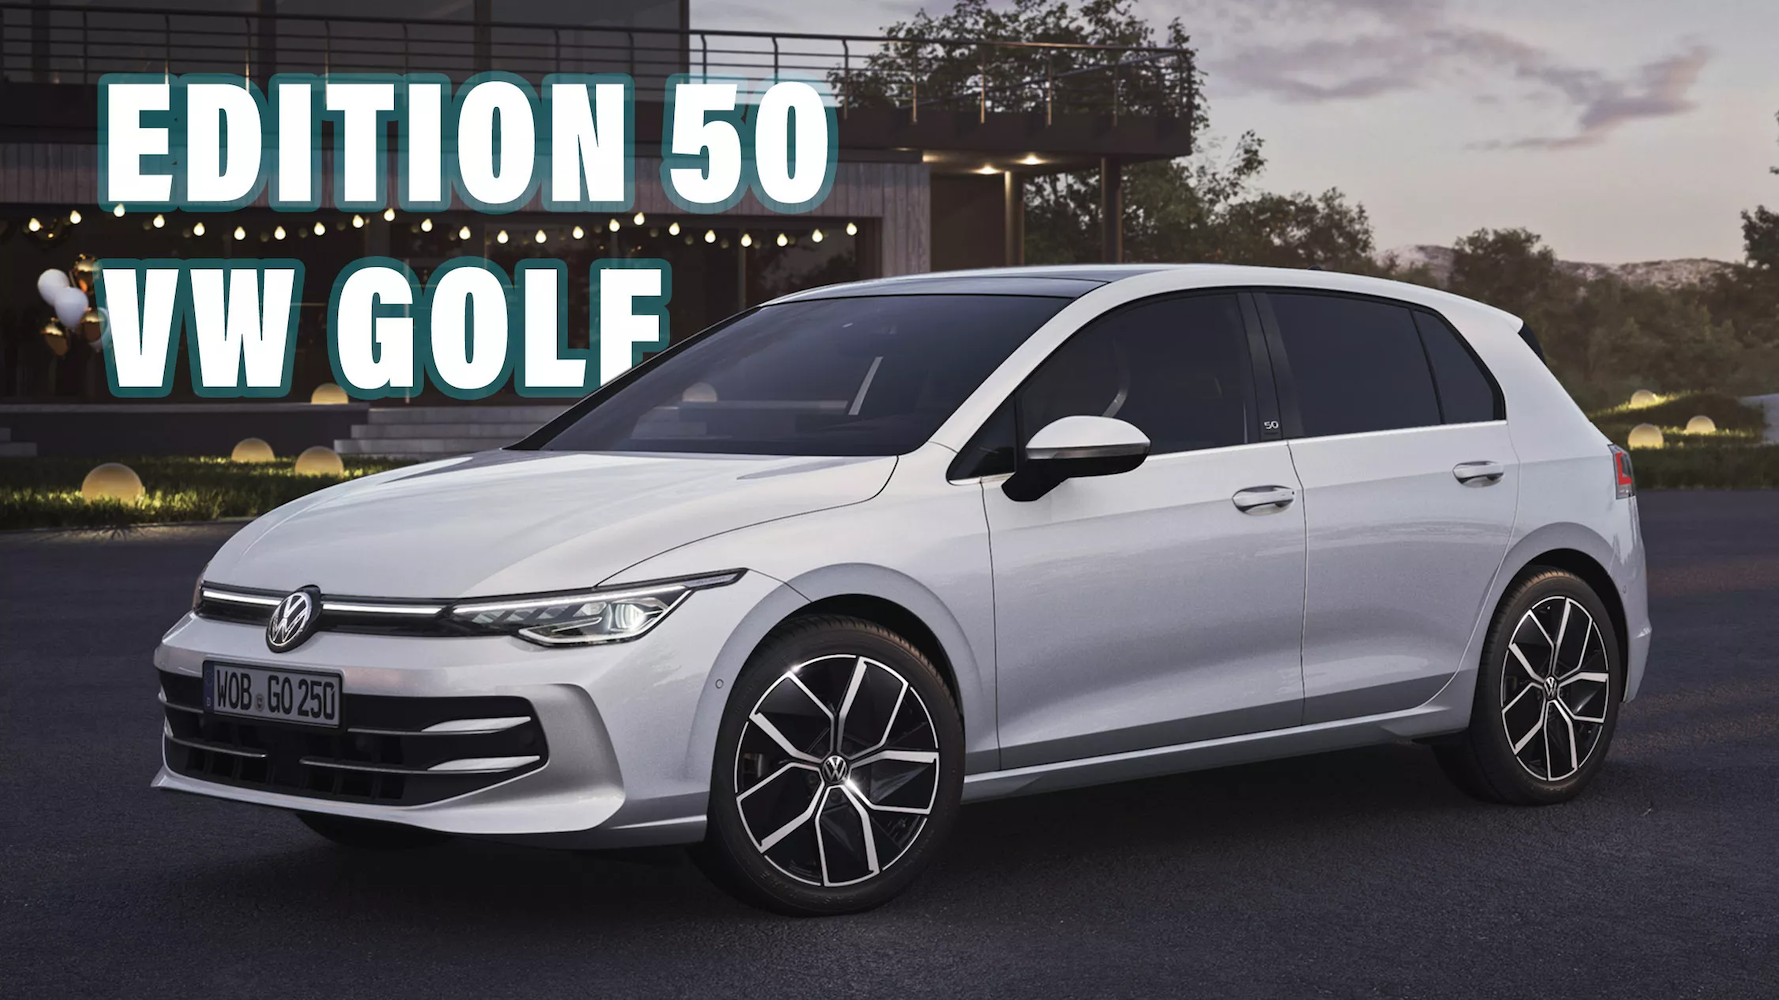 Volkswagen started selling the new Golf in Europe and released the anniversary model Edition 50